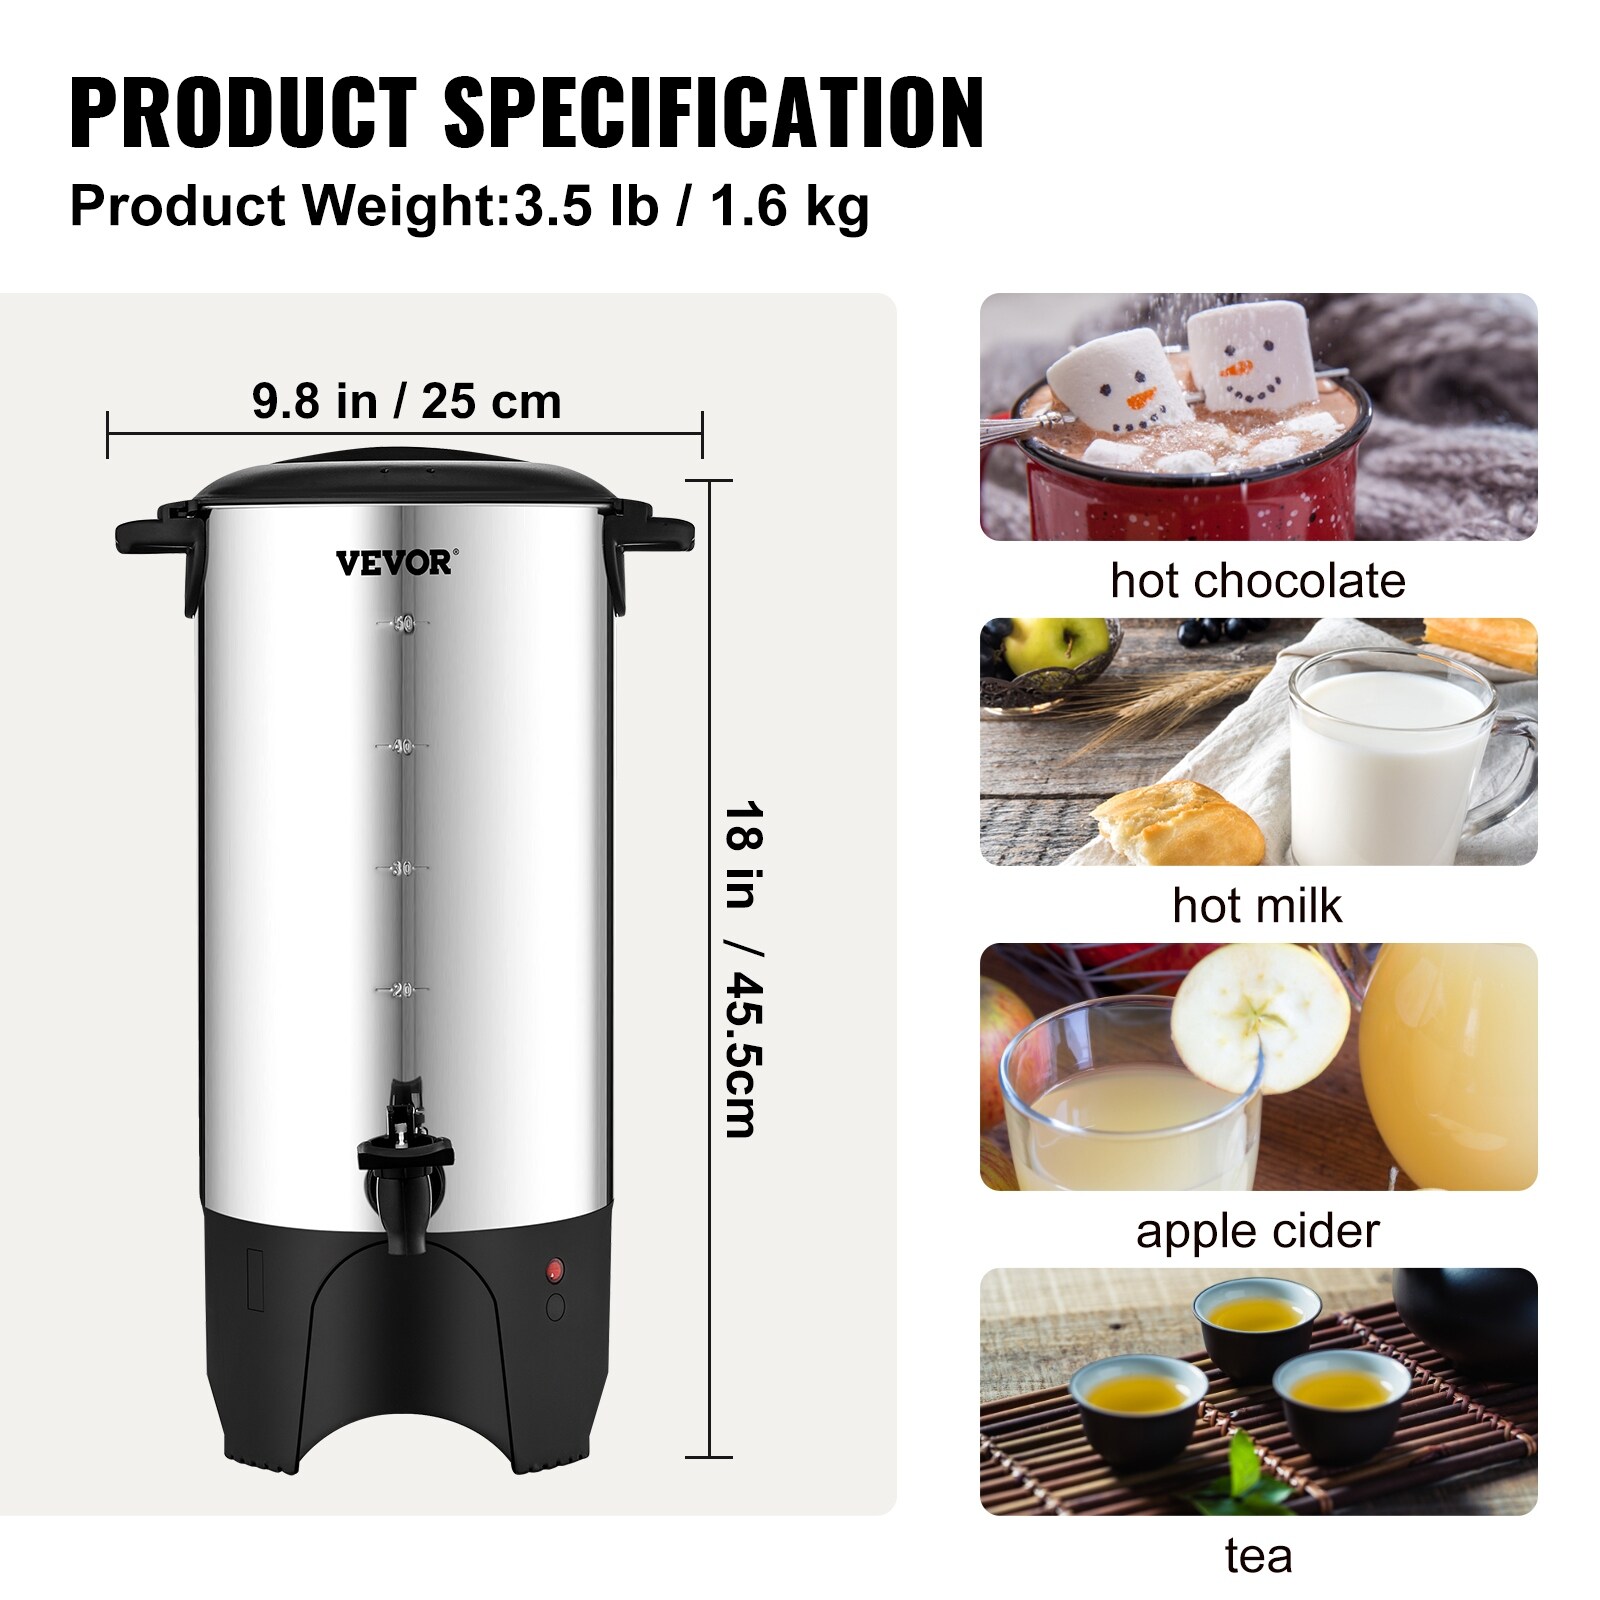 https://ak1.ostkcdn.com/images/products/is/images/direct/270dfb16fa918371359bfbd7fad936f4f6720c29/VEVOR-Commercial-Coffee-Urn-50-110-Cup-Stainless-Steel-Coffee-Dispenser-Fast-Brew.jpg